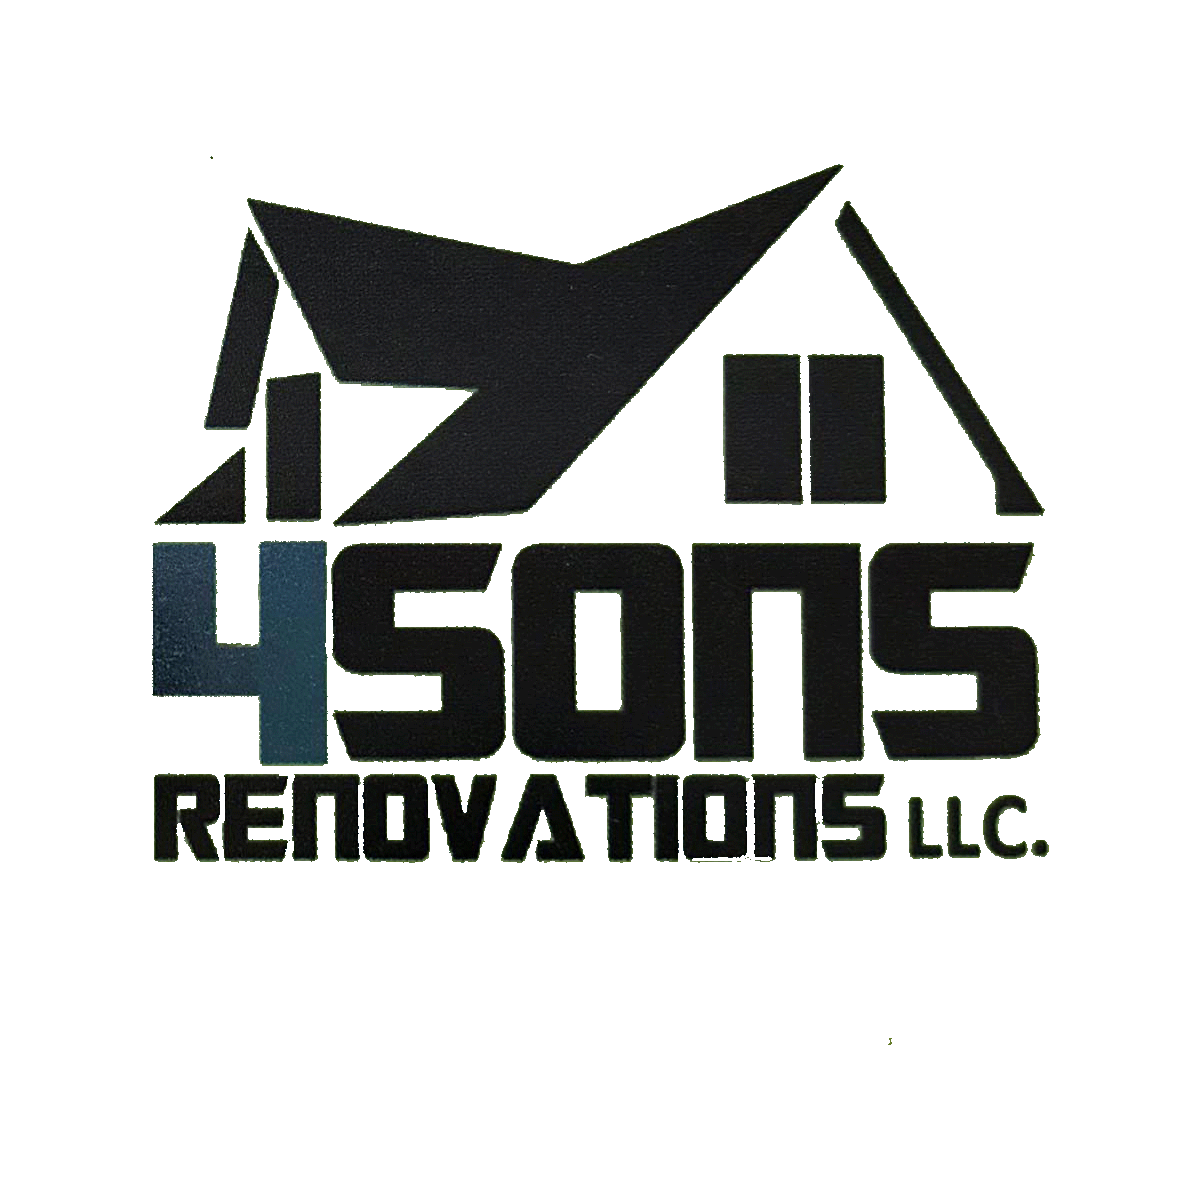 4 Sons Renovations is a veteran-owned and operated service for renovations, remodels, and home repairs.